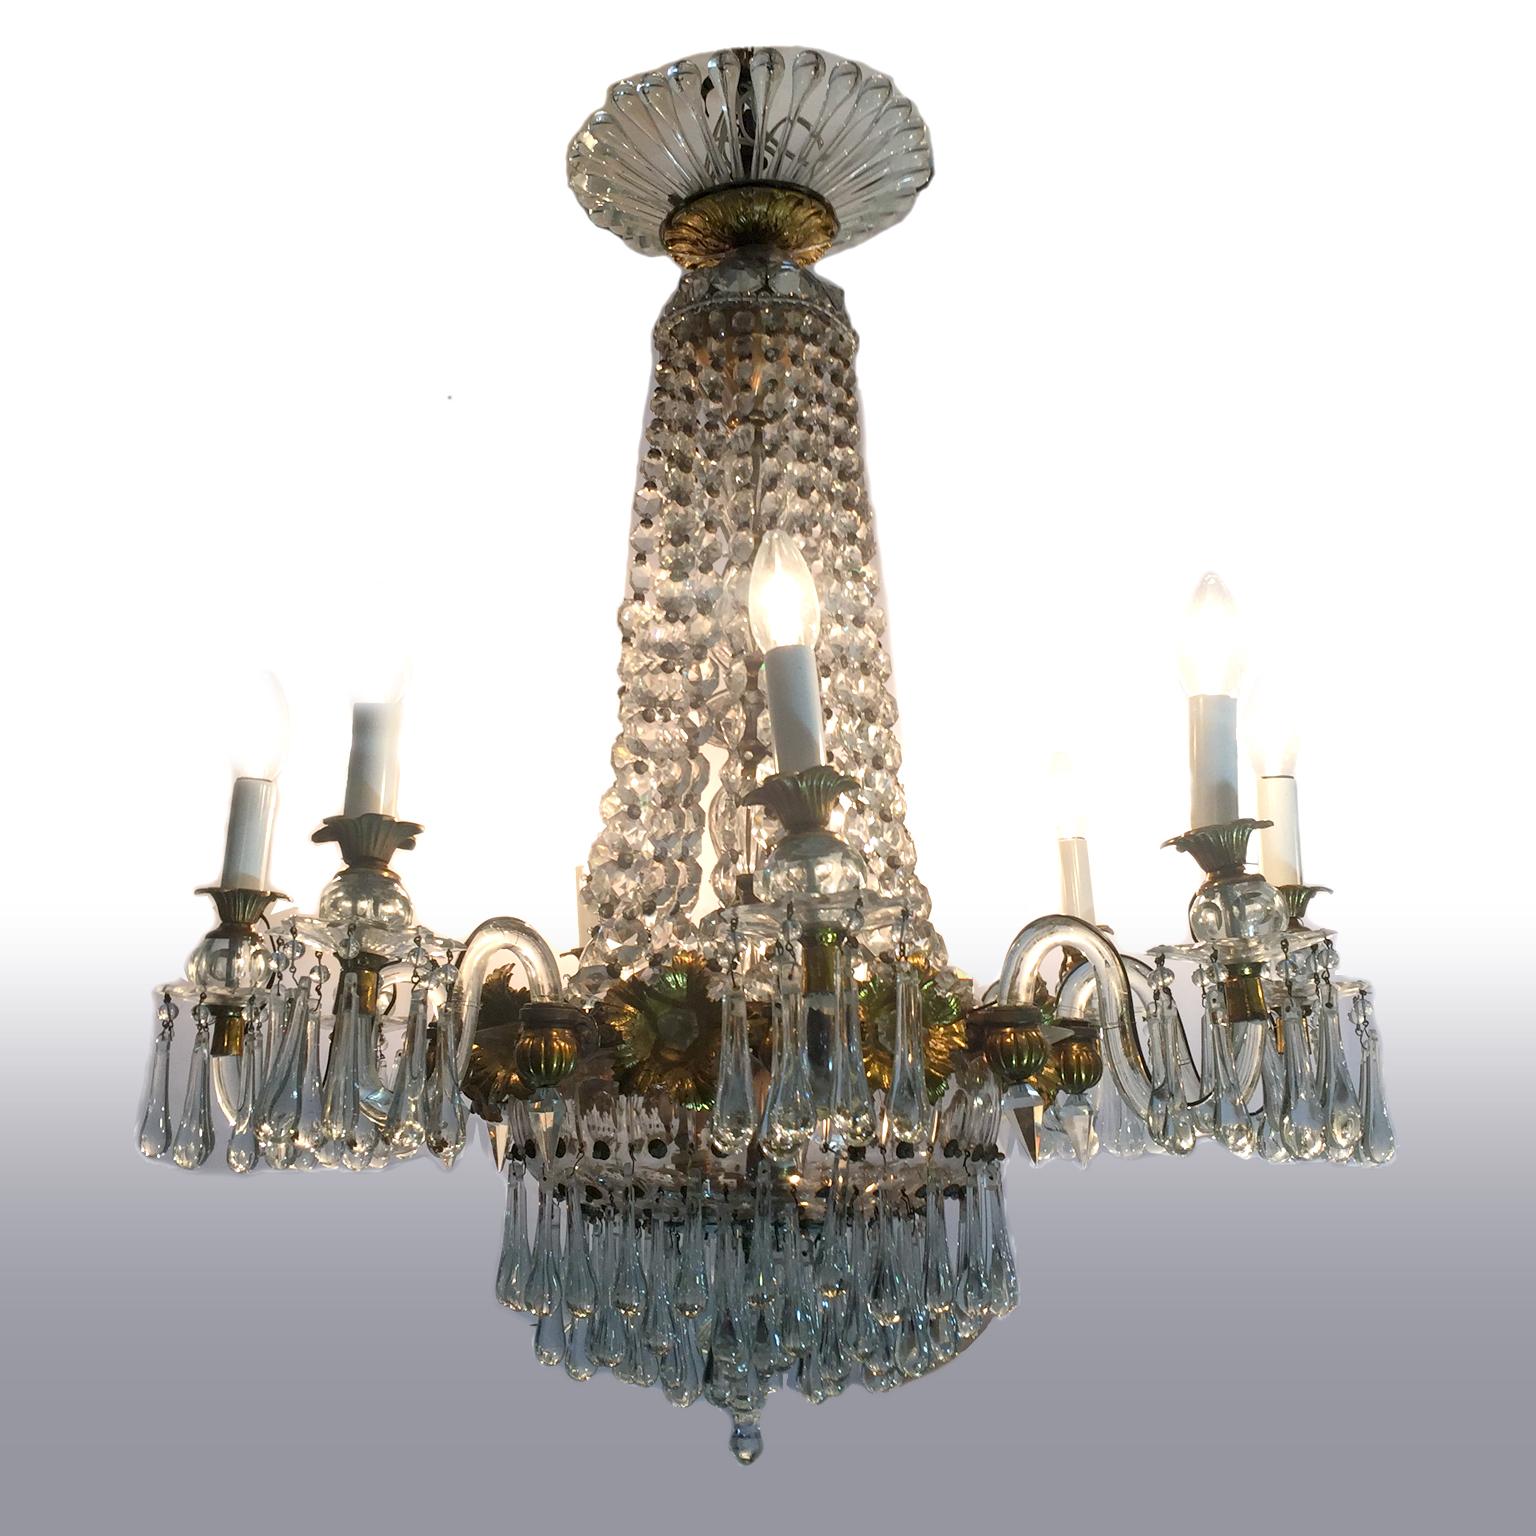 Stunning sack chandelier thing with bottom ground glass and drop pendant.
Gilded bronze ring, 12 crystal branches, at a later time addition 4 light within the base. Italian chandelier, of the period of Carlo X. 




 